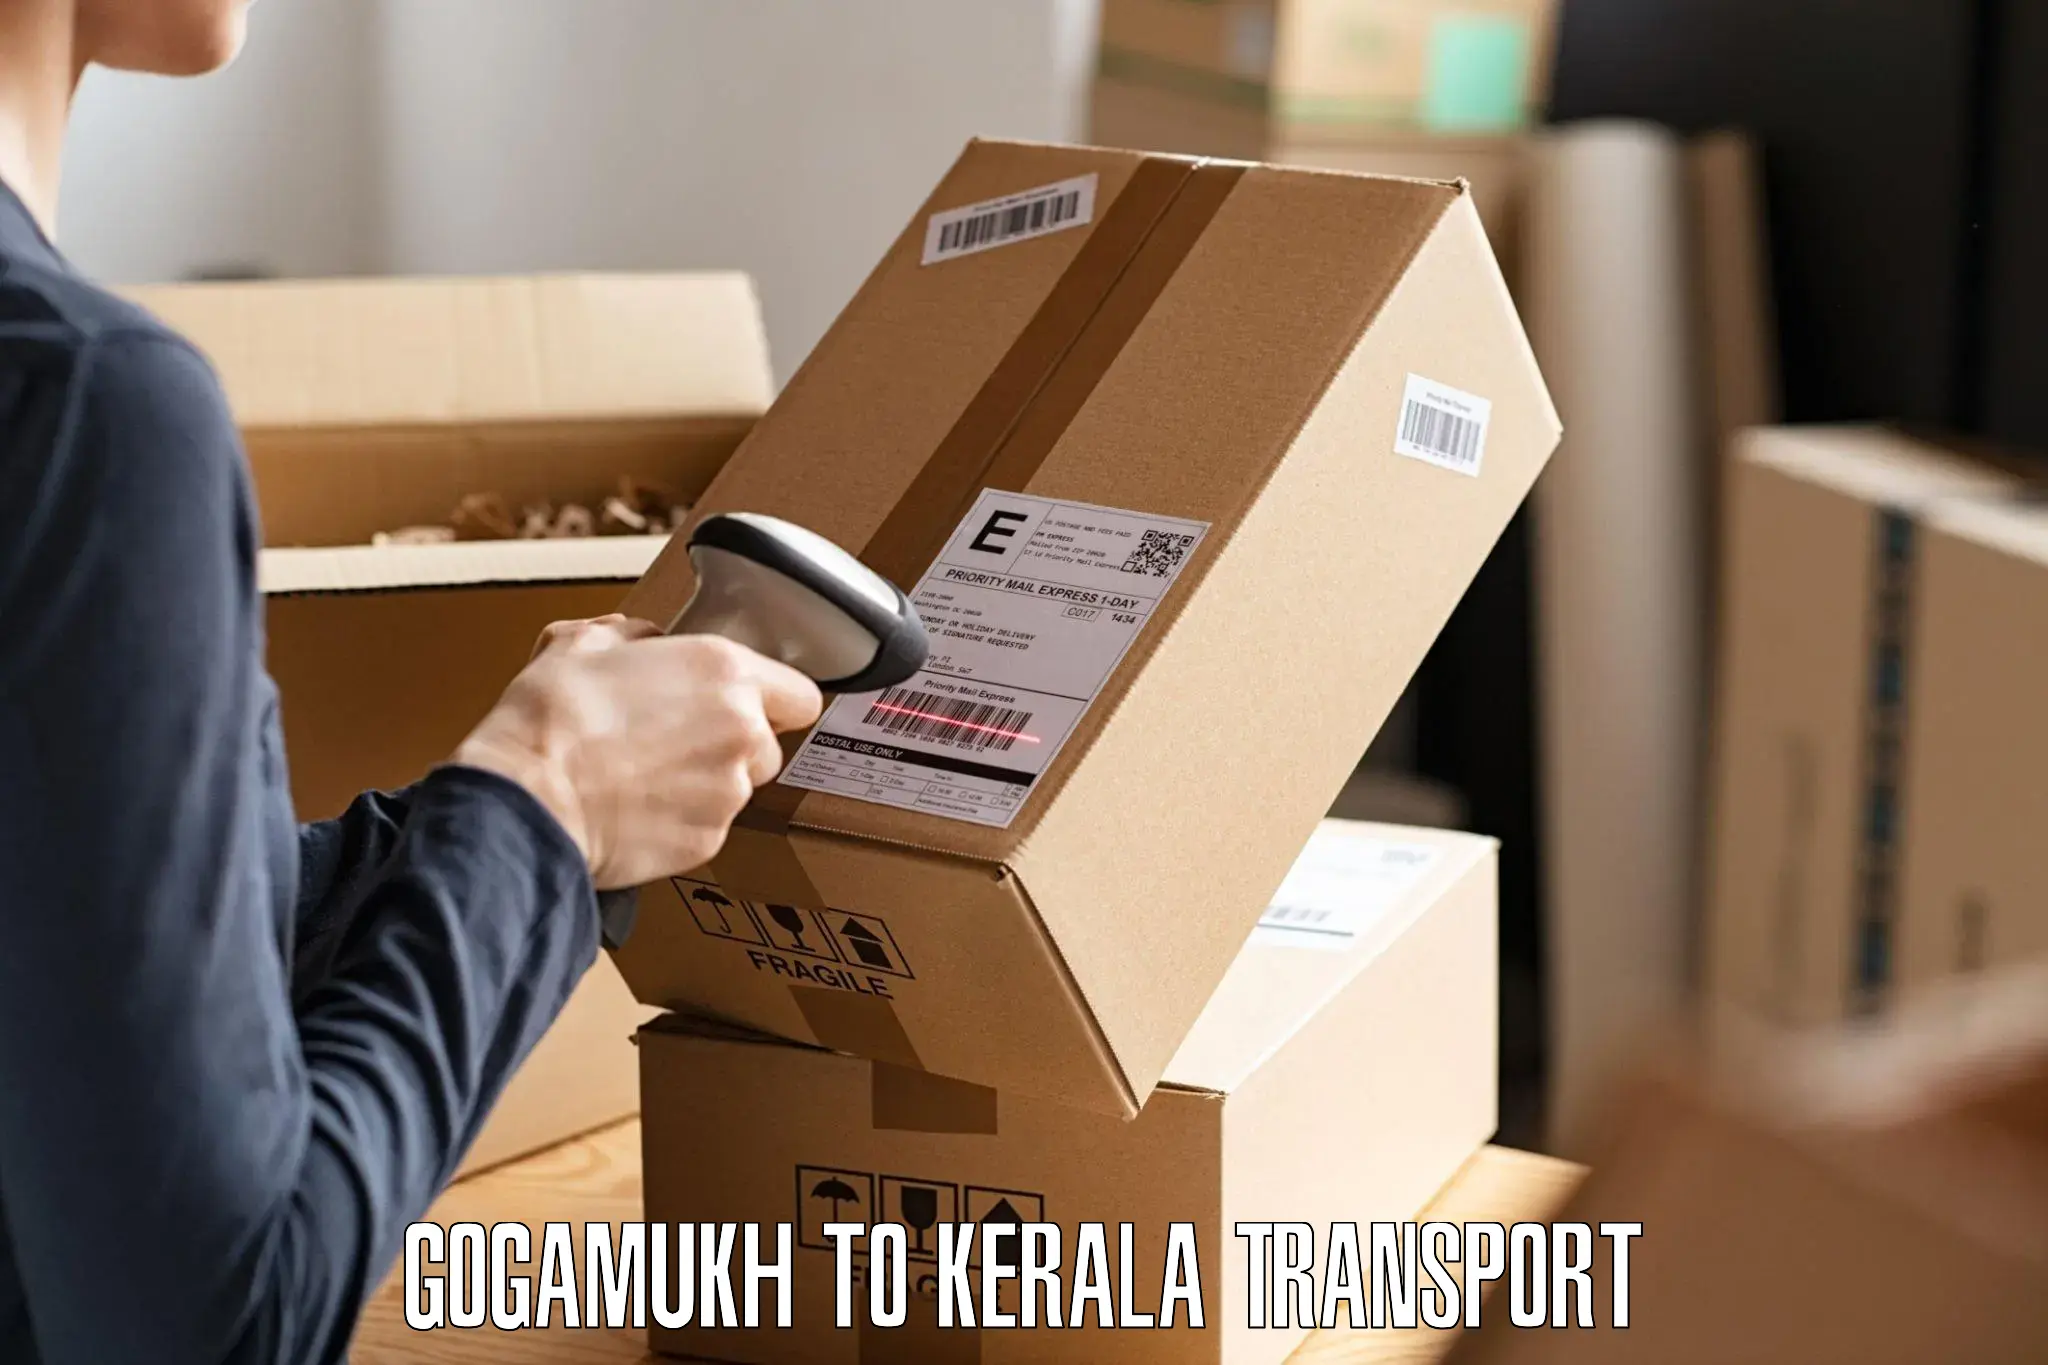 Online transport booking Gogamukh to Cochin University of Science and Technology